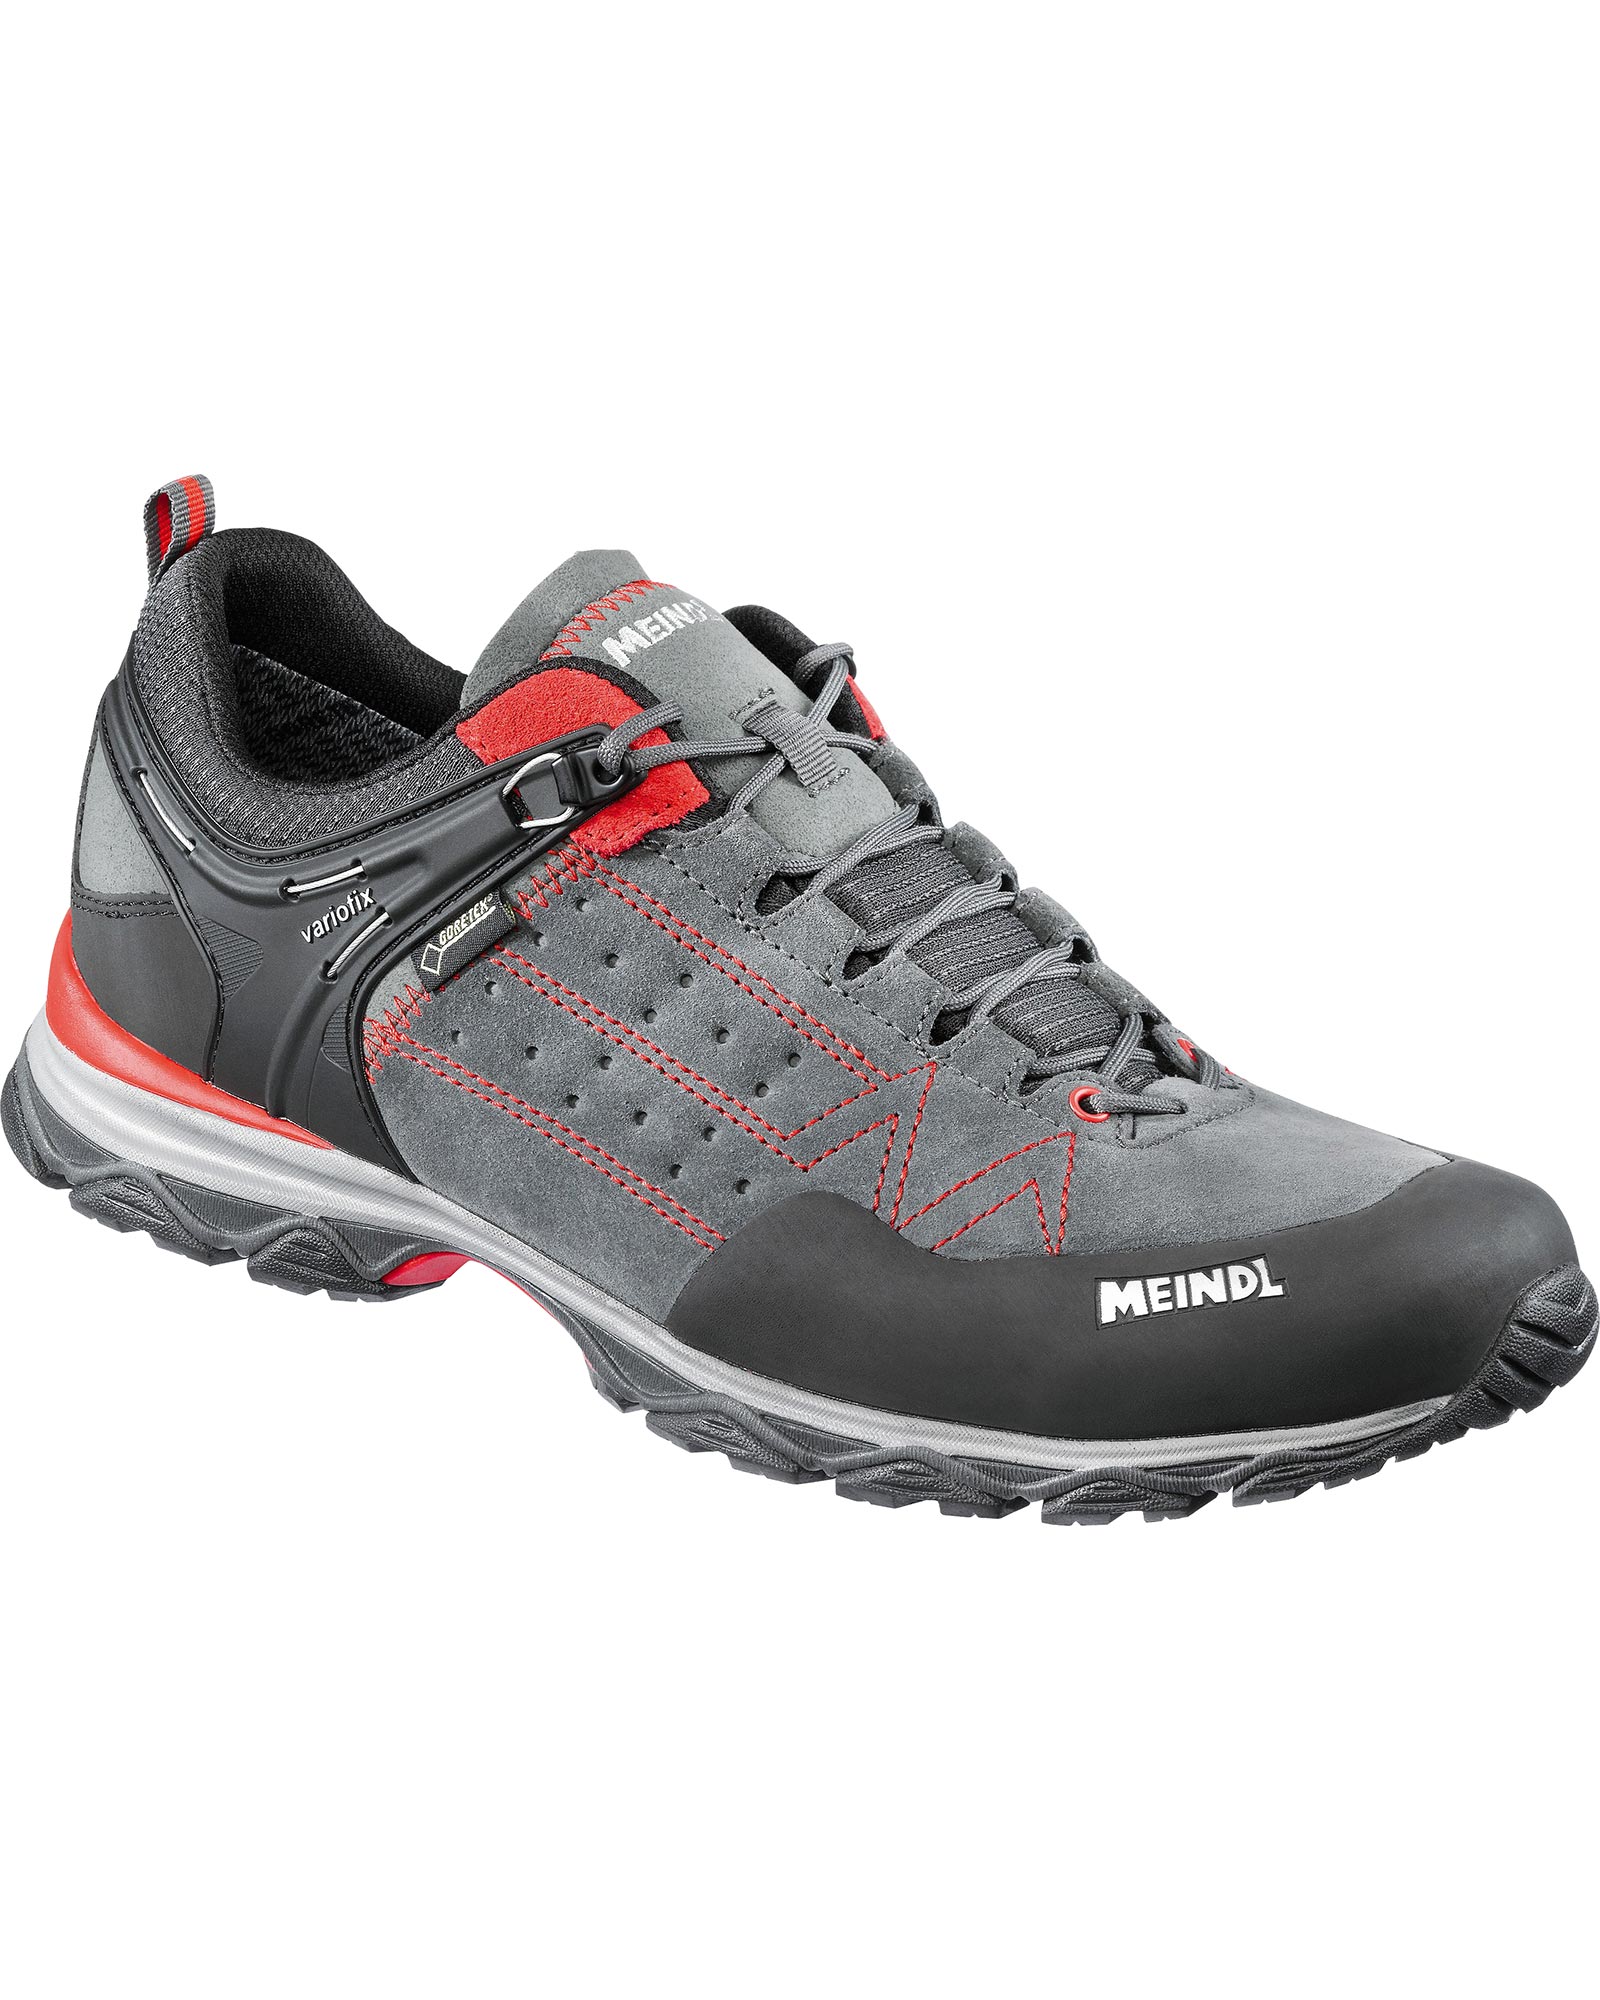 Meindl Ontario GORE TEX Men’s Shoes - Red/Anthracite UK 9.5